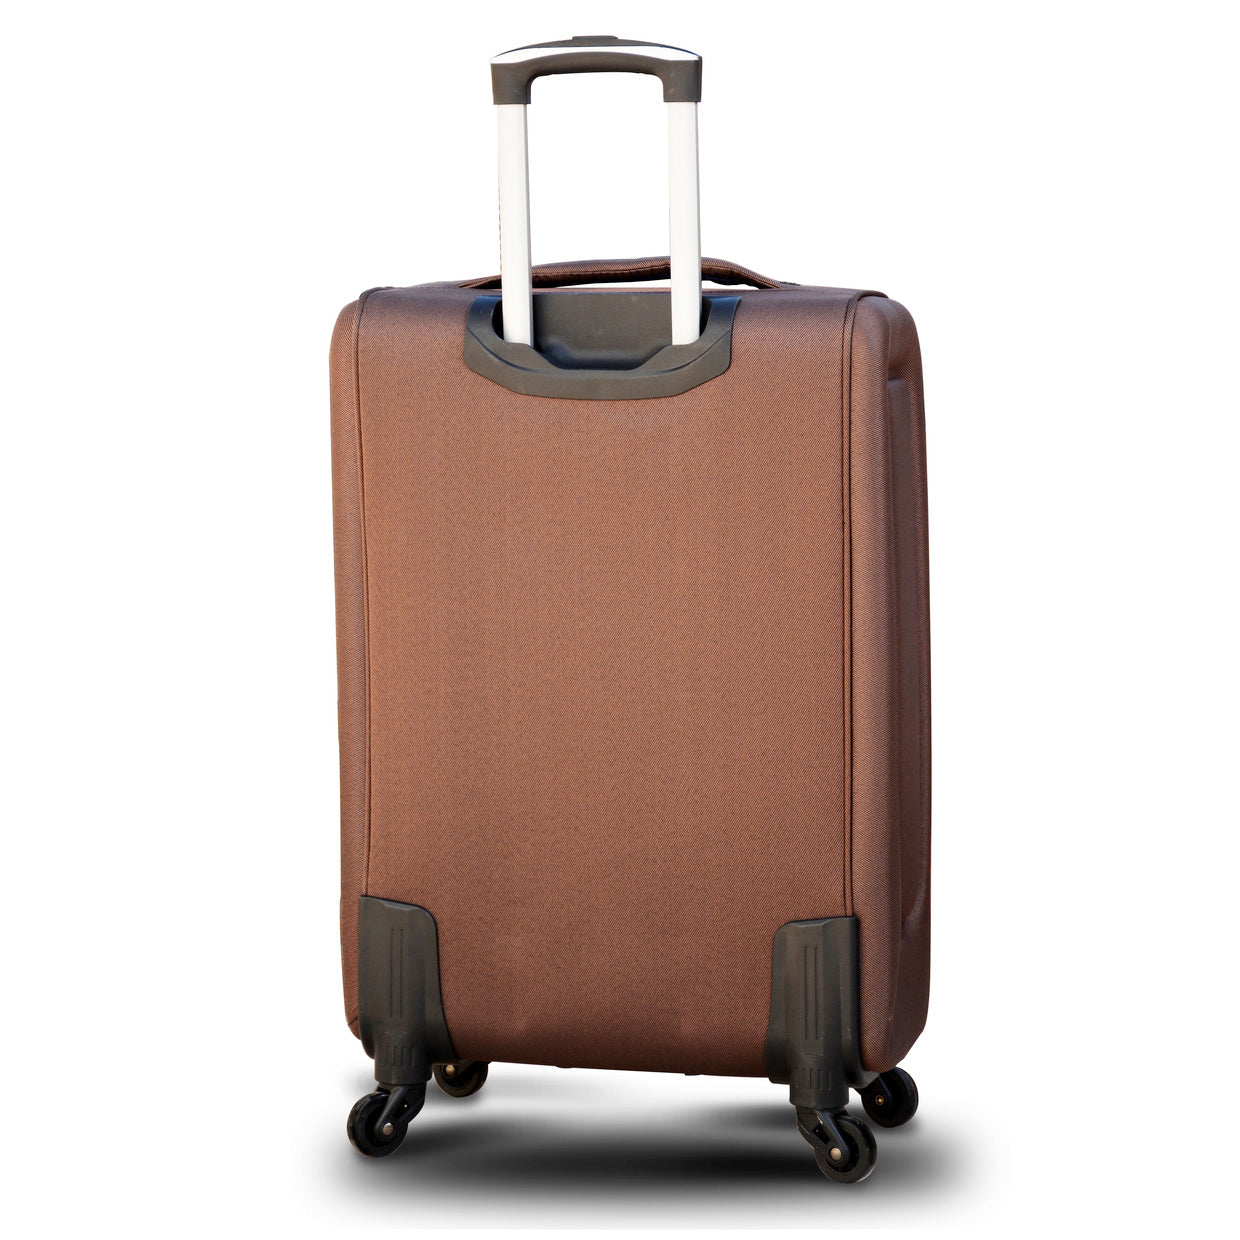 4 Wheels Soft Material Lightweight Luggage